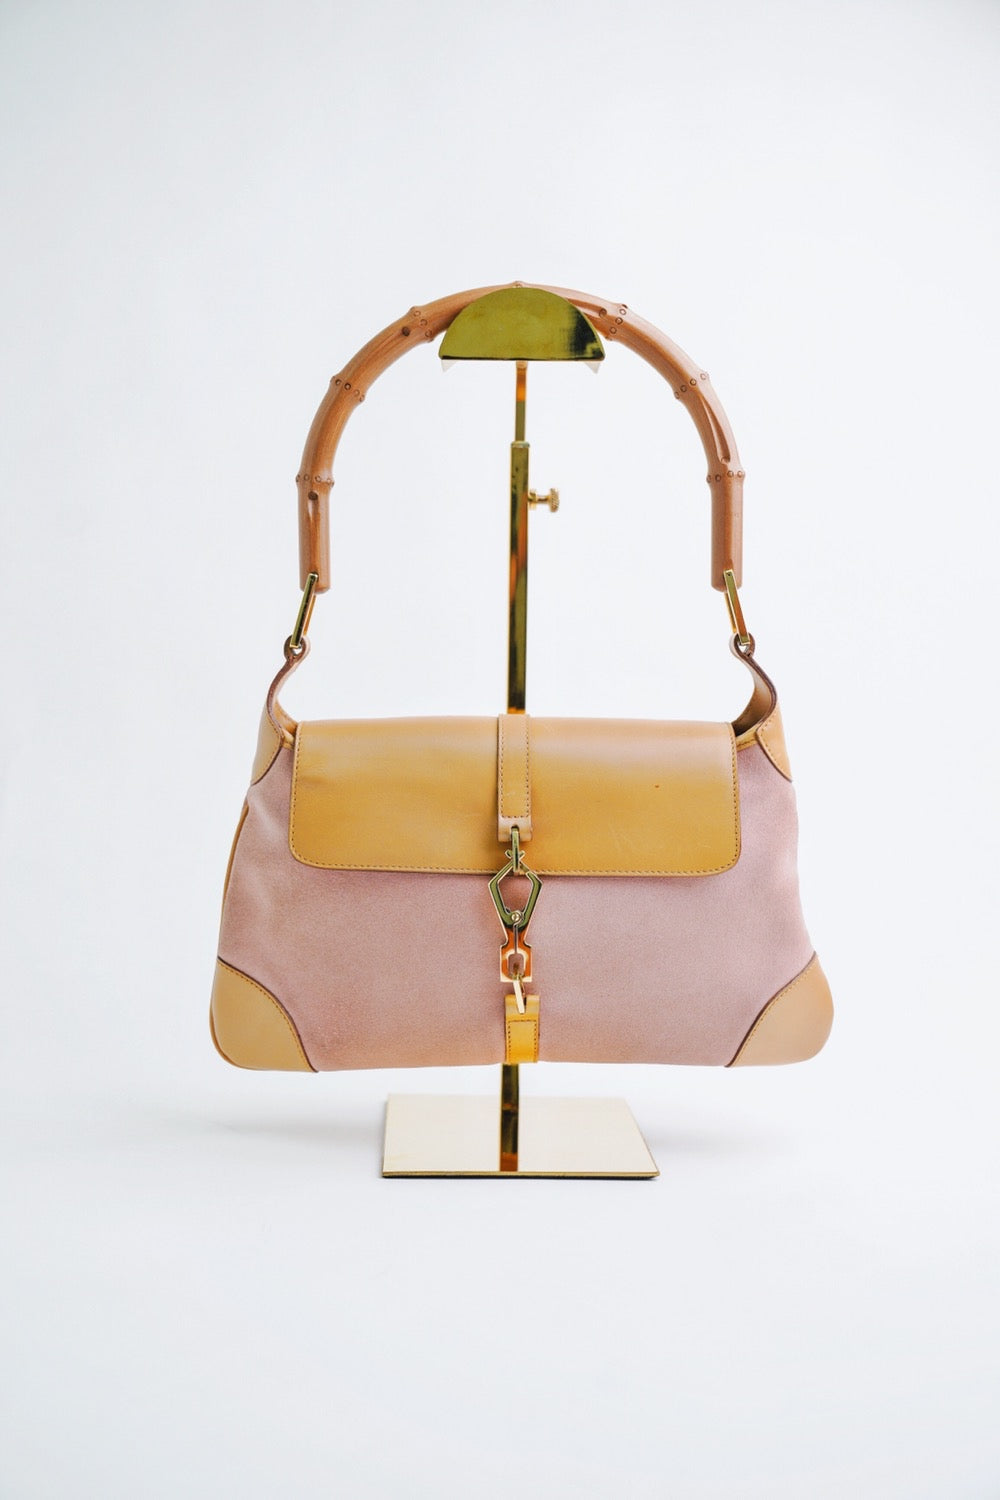 Gucci Hand Bag Bamboo Beige Suede